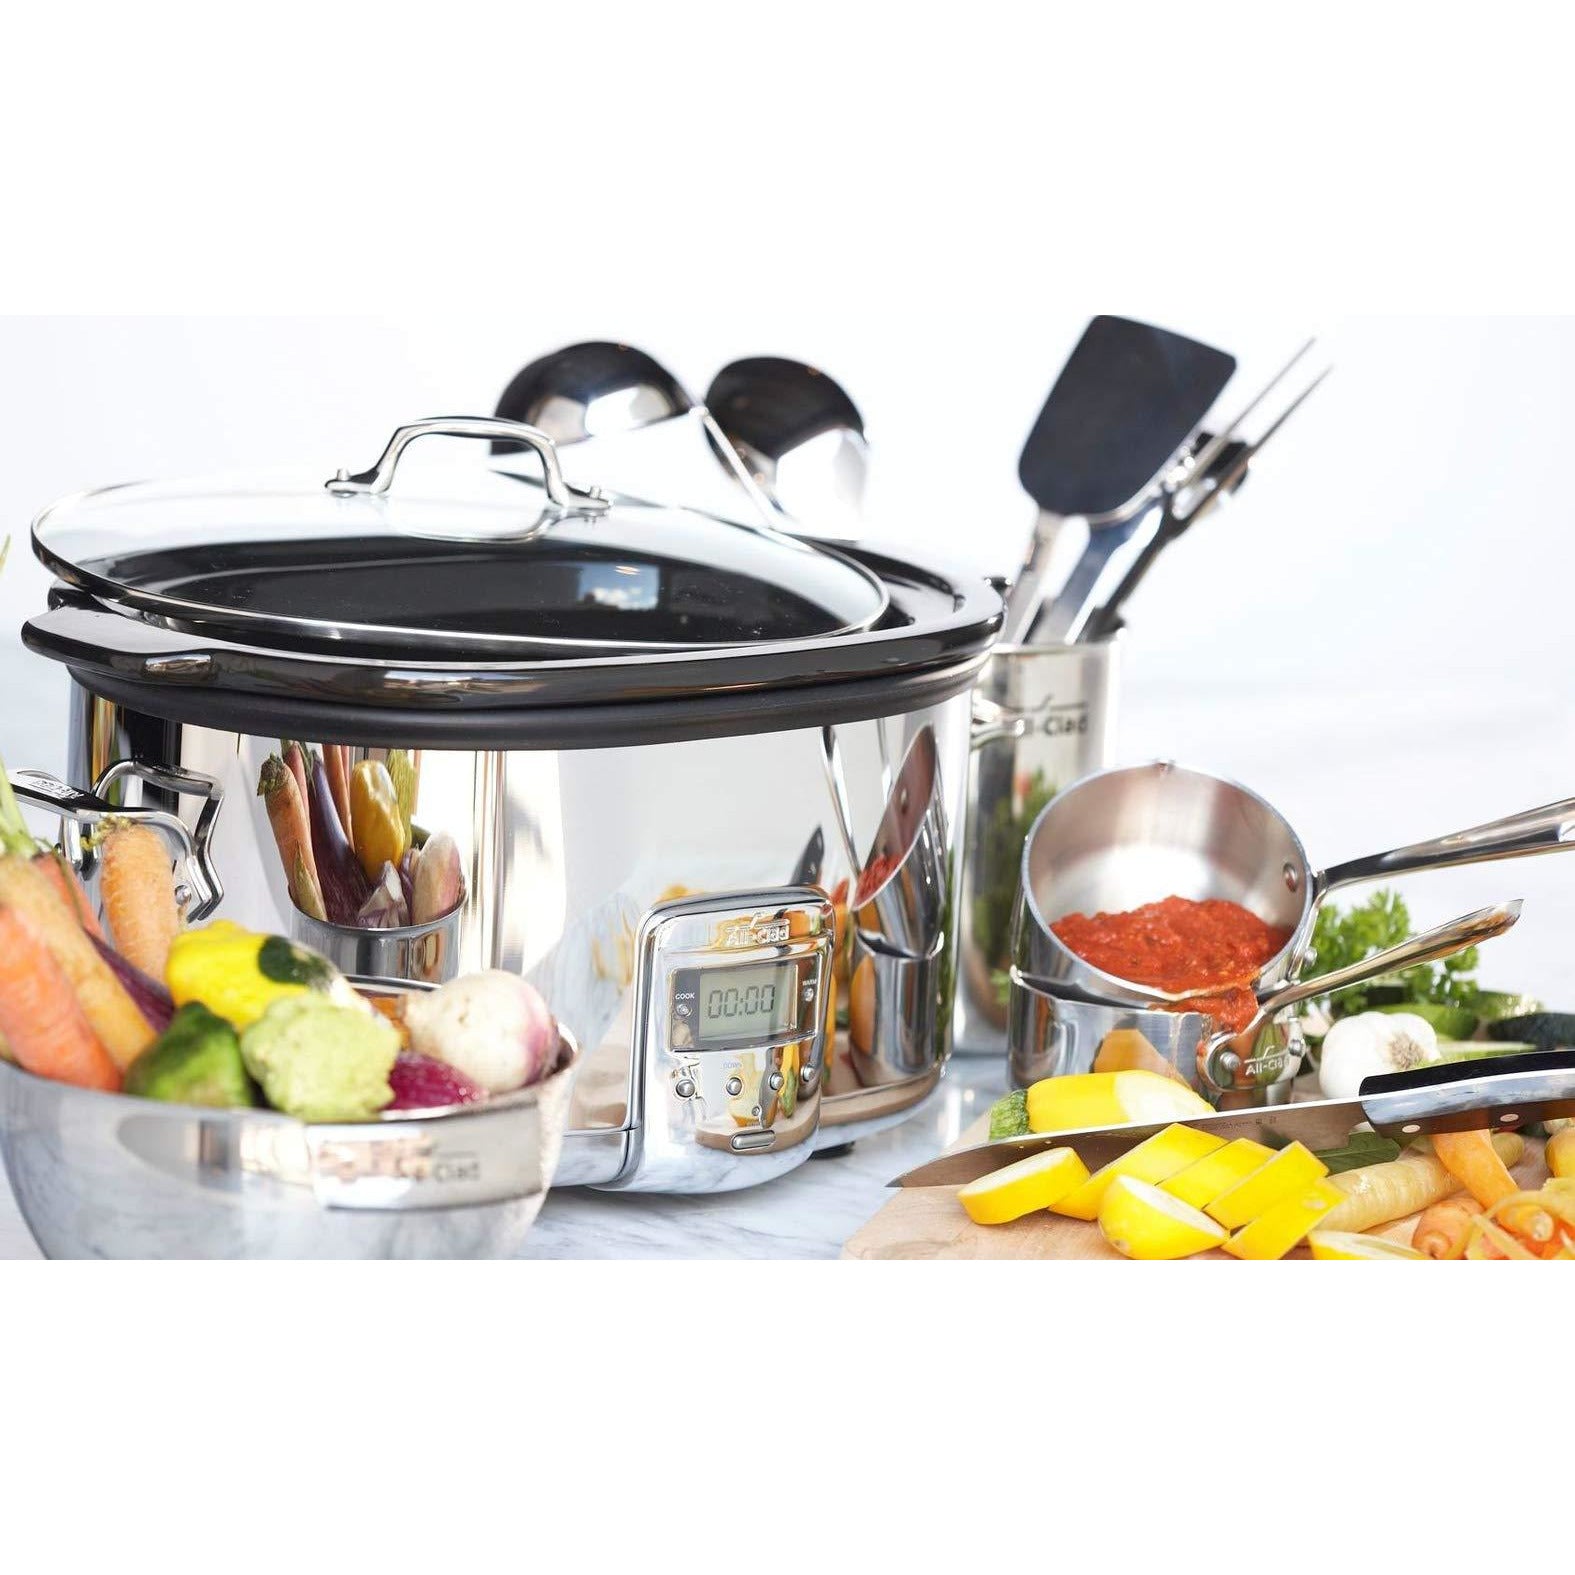 All-Clad Electric Slow Cooker with Black Ceramic Insert (99009